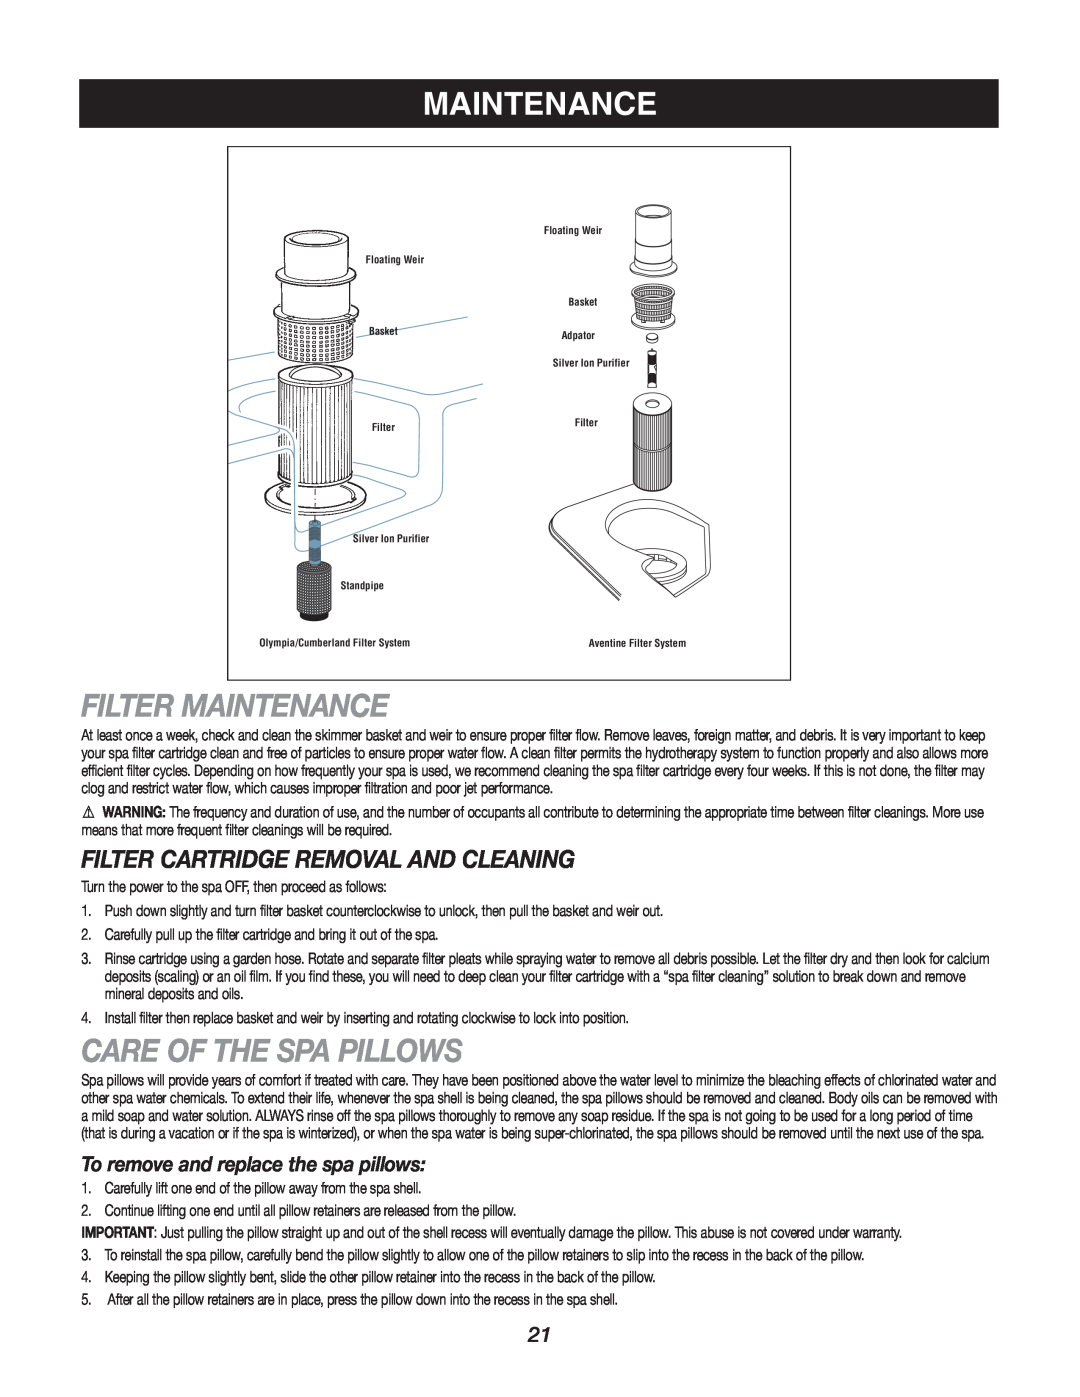 Caldera Highland Series owner manual Filter Maintenance, Care Of The Spa Pillows, Filter Cartridge Removal And Cleaning 